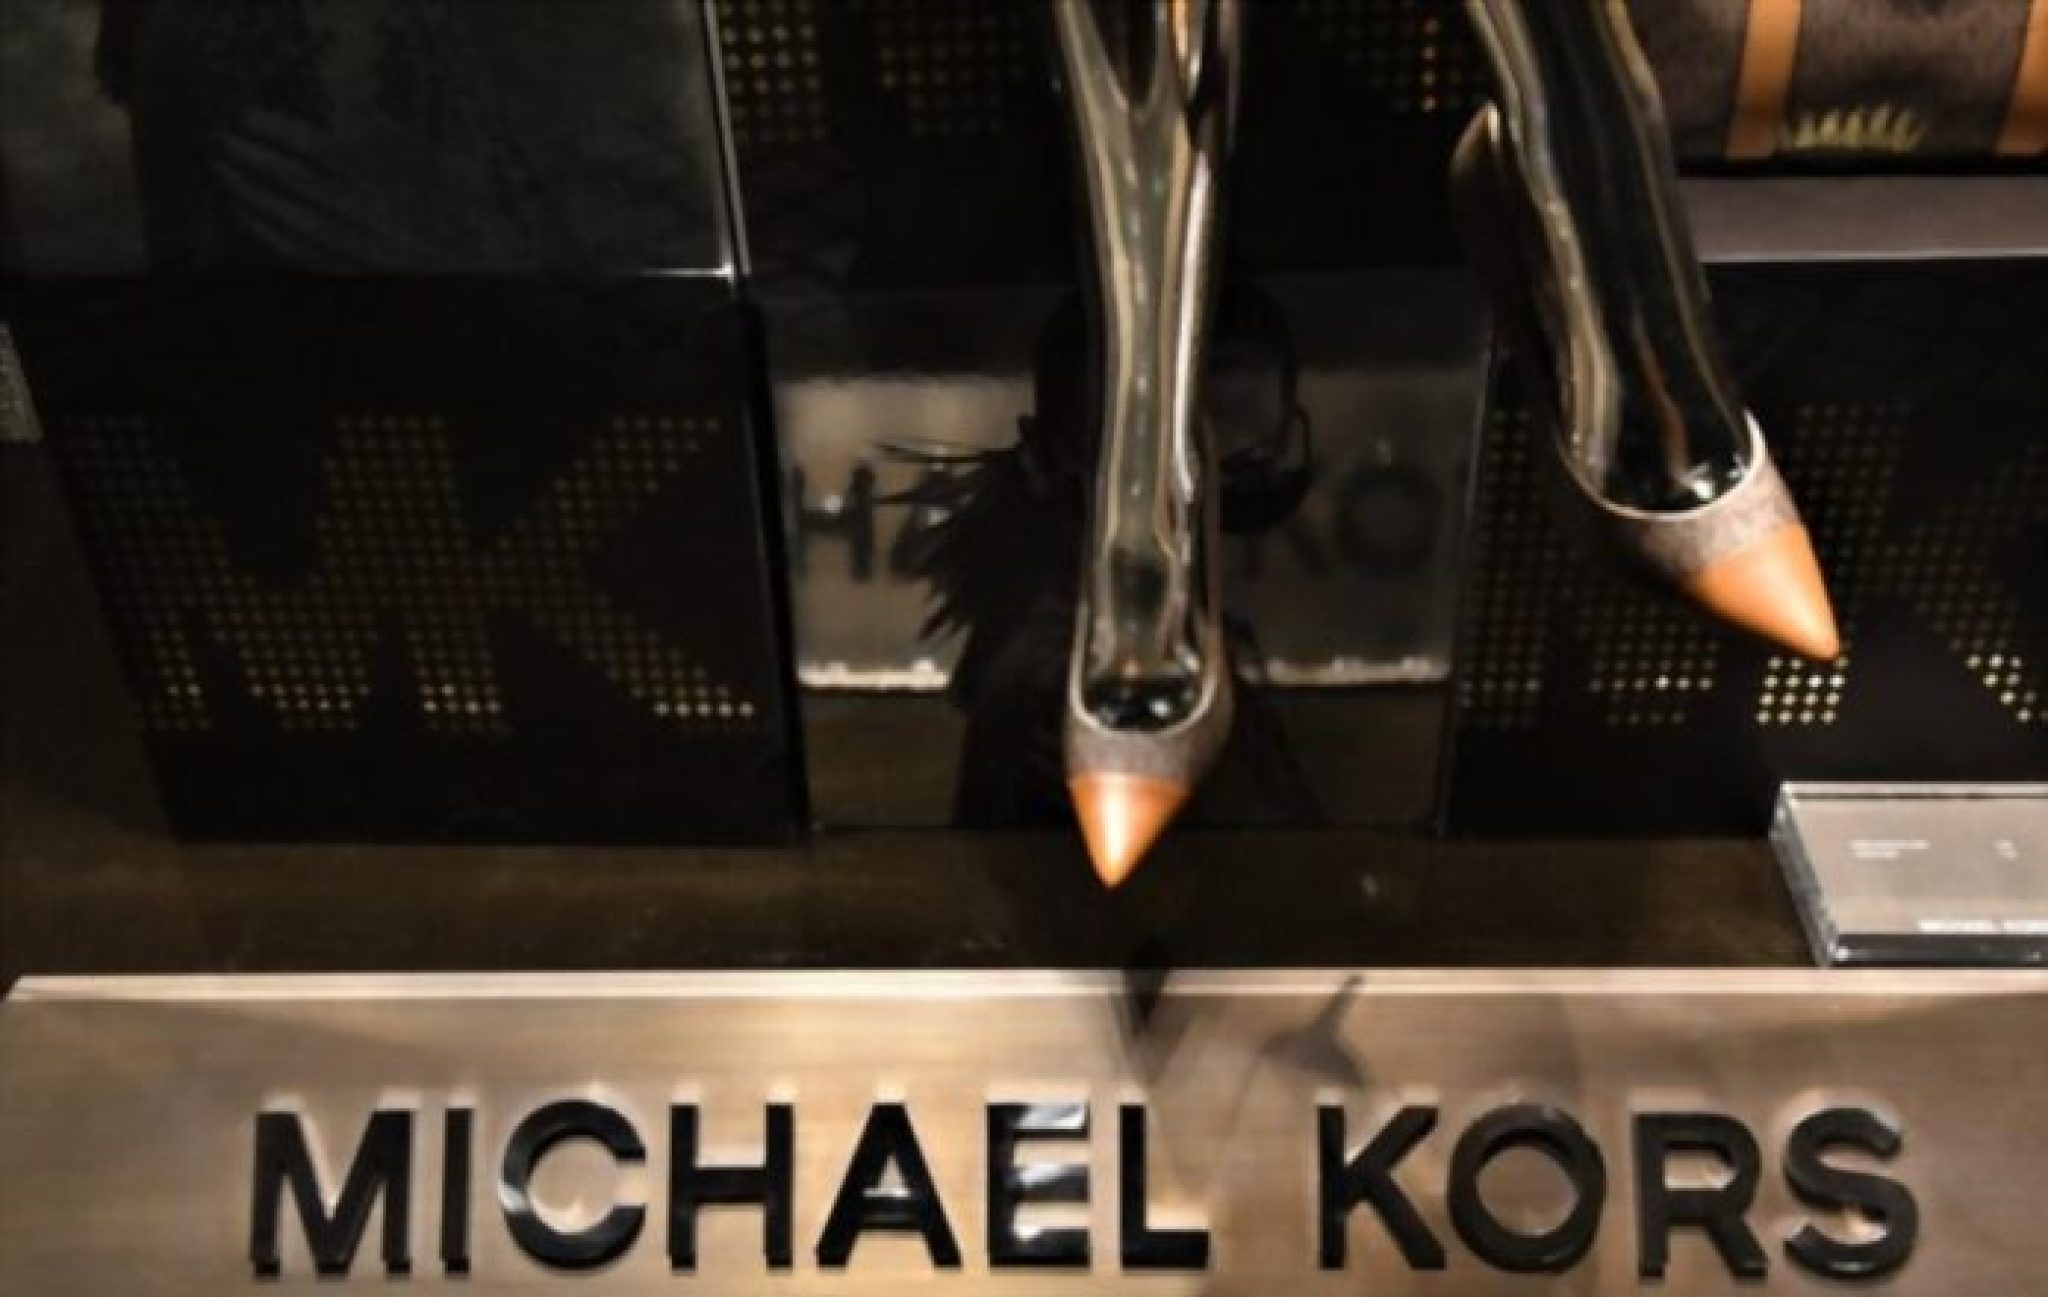 Michael Kors Shoe Size Chart Are Their Shoes Good Fit? The Shoe Box NYC